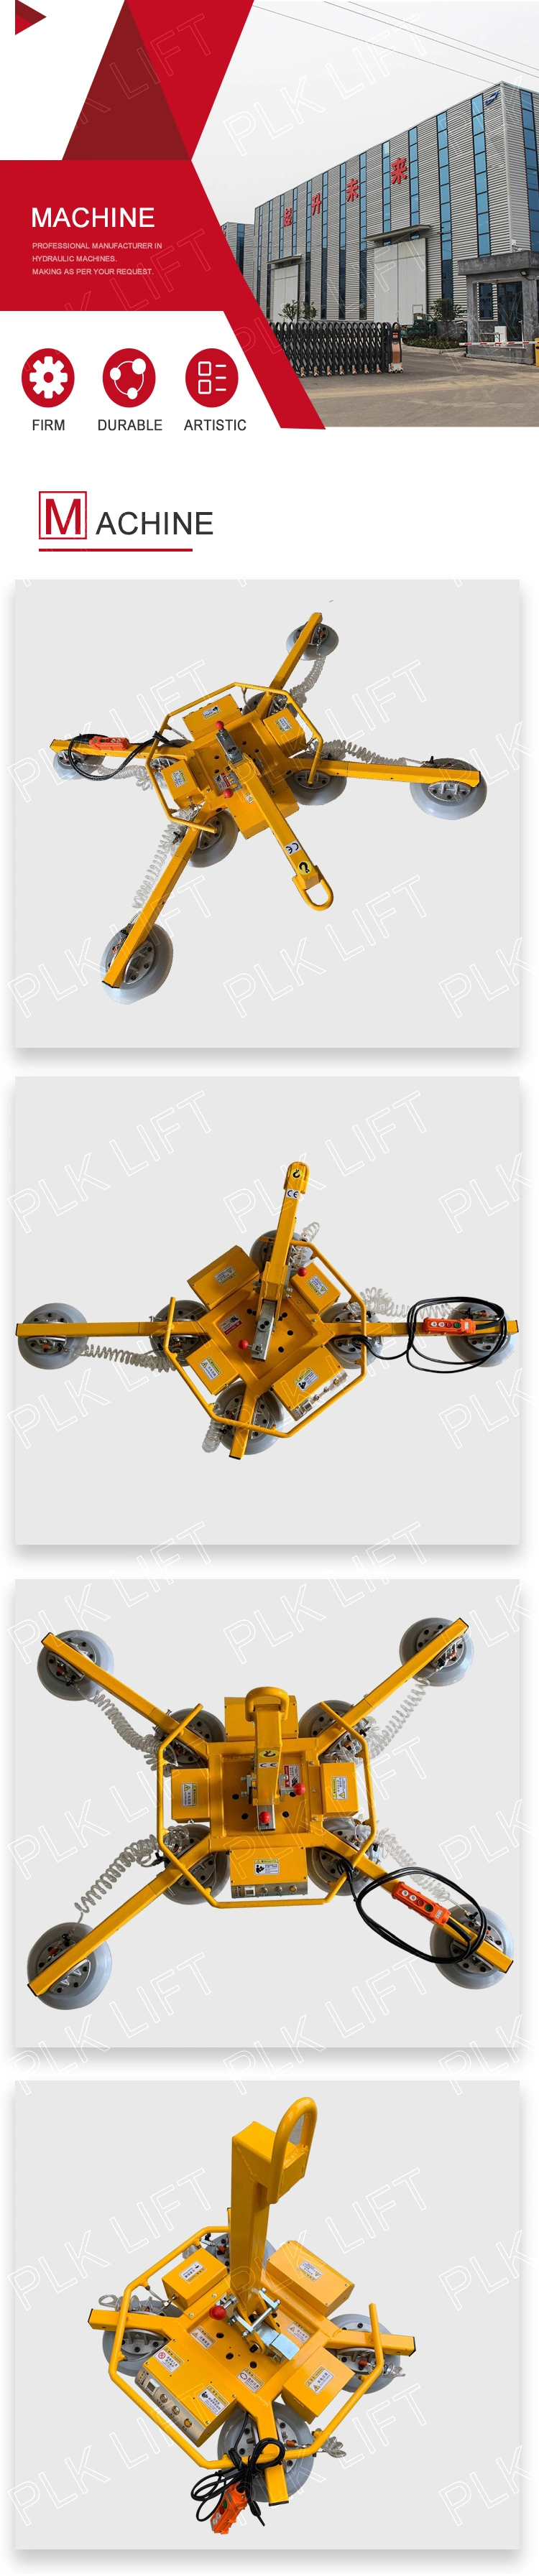 400kg Safe Load Glass Suction Cup Vacuum Glass Lifter